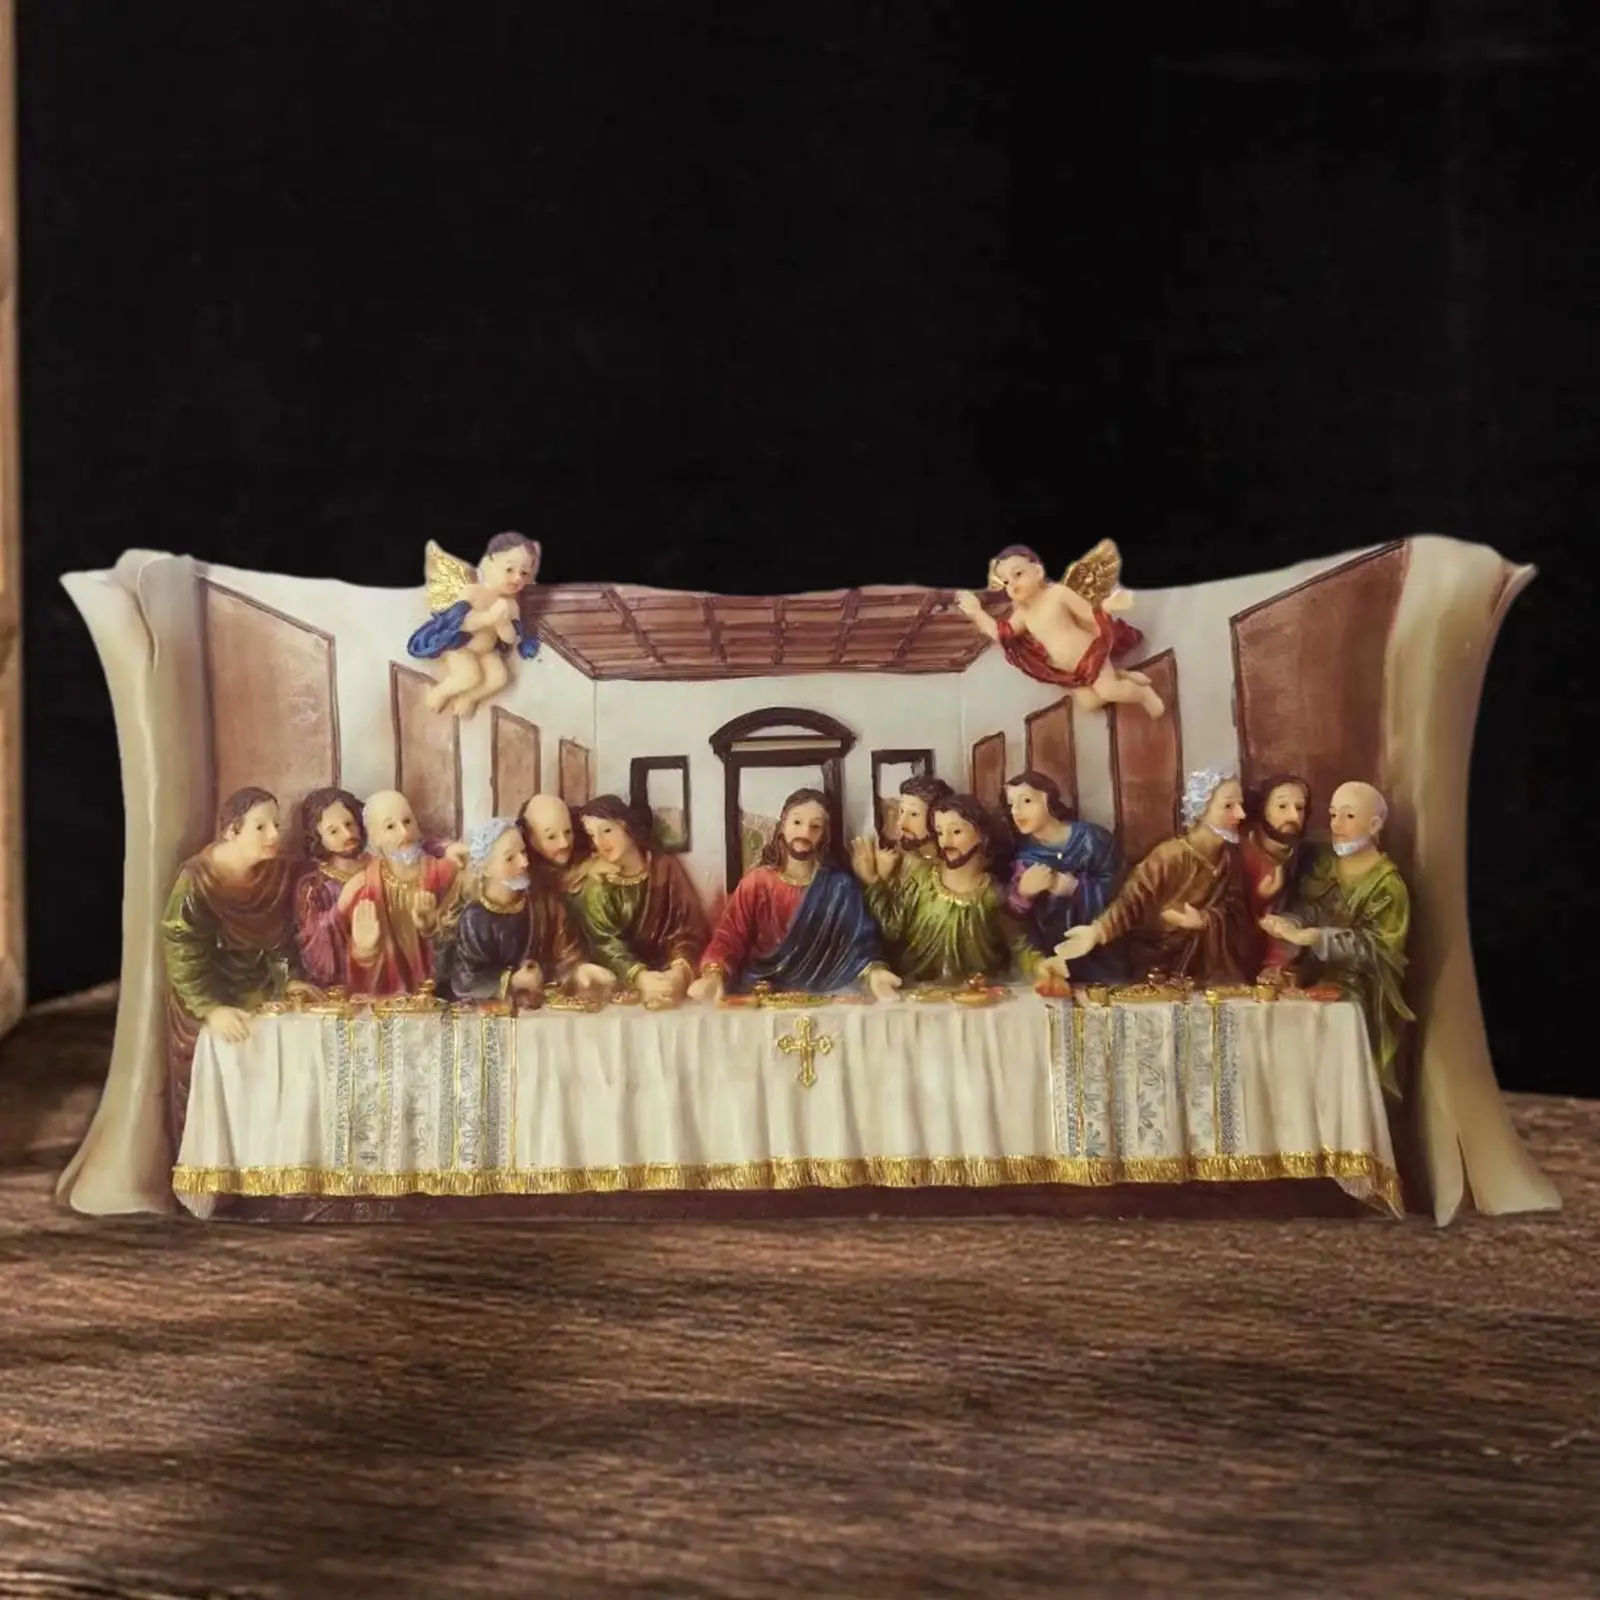 Resin Last Supper Sculpture Statue Office Decoration Jesus and 12 Disciples for Bedroom Living Room Home Office Collection Gifts